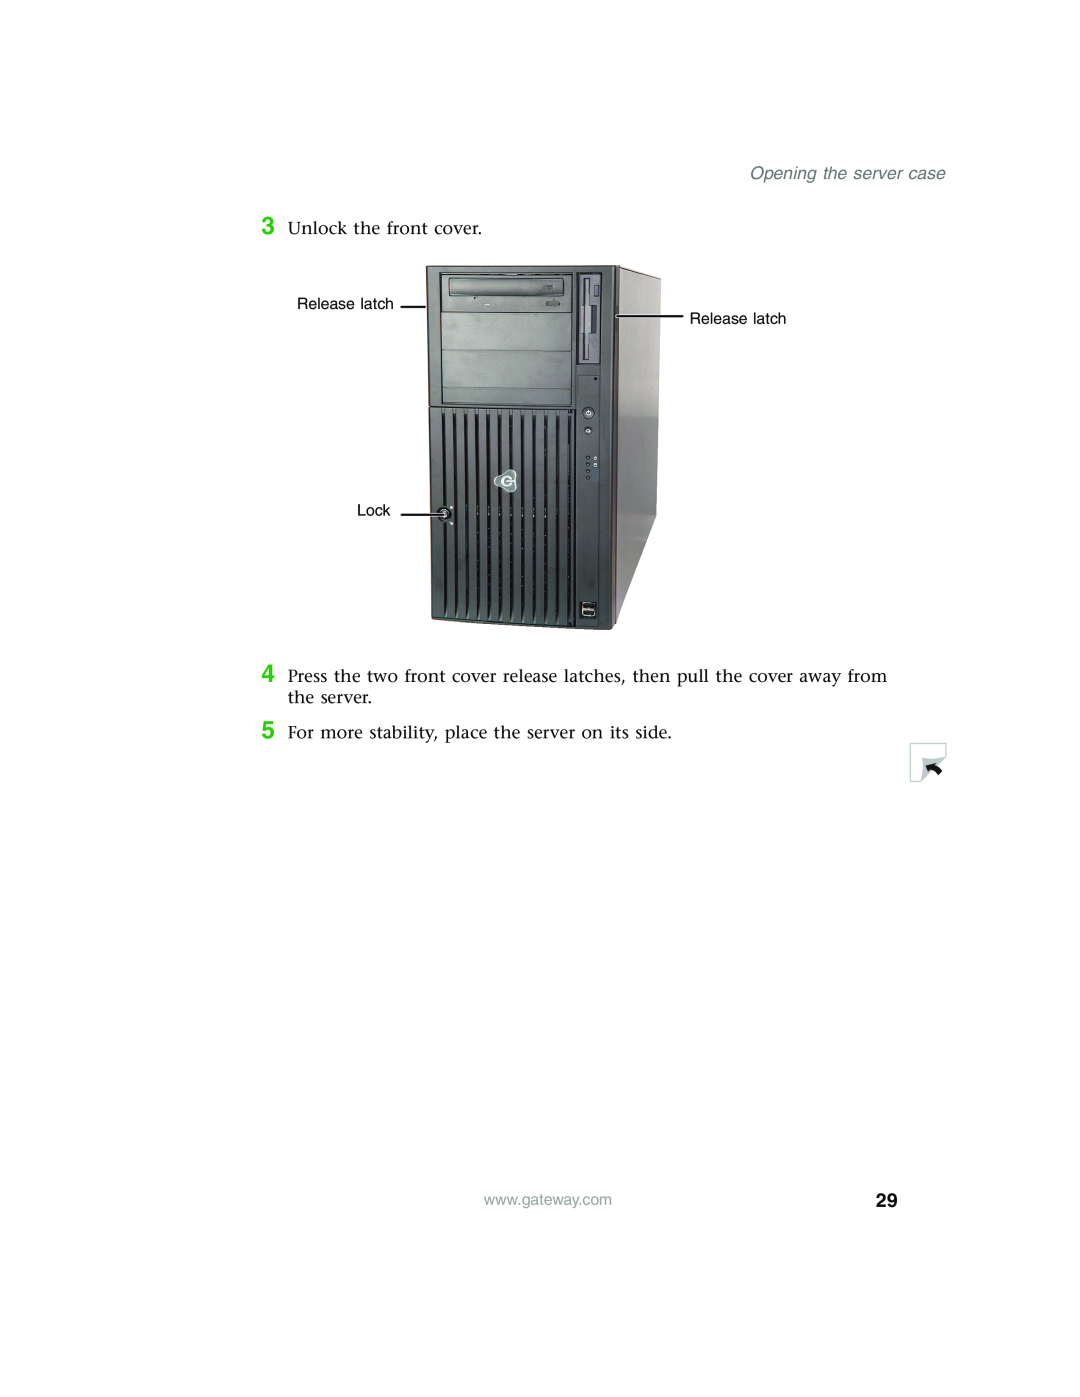 Gateway 980 manual Opening the server case, Unlock the front cover, For more stability, place the server on its side 